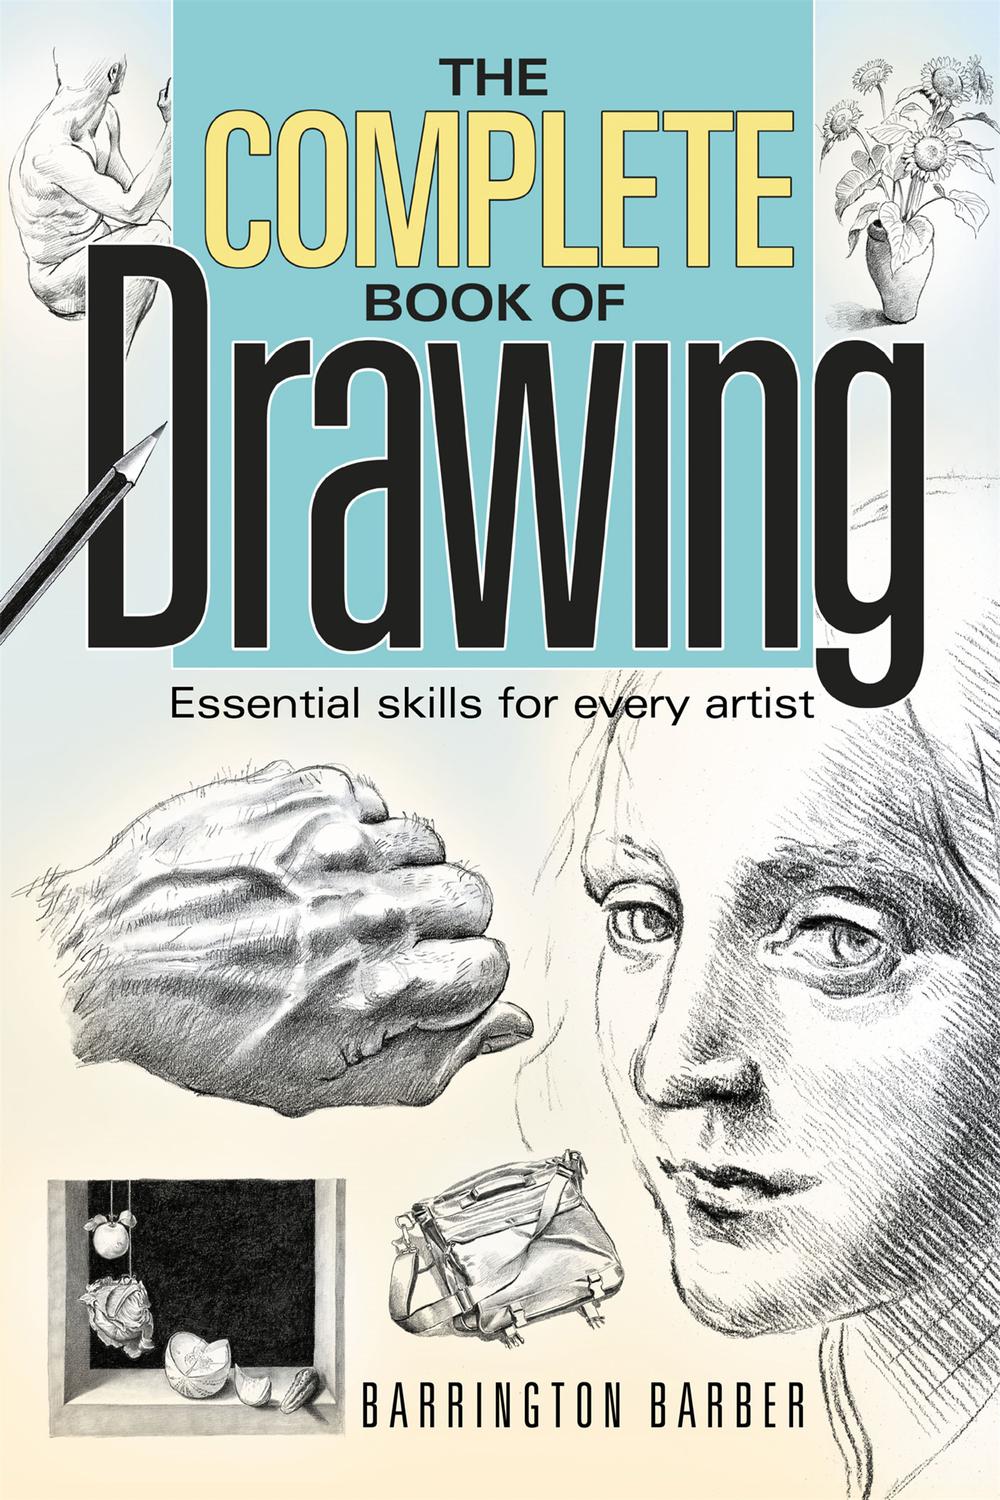 PDF] The Complete Book of Drawing by Barrington Barber eBook